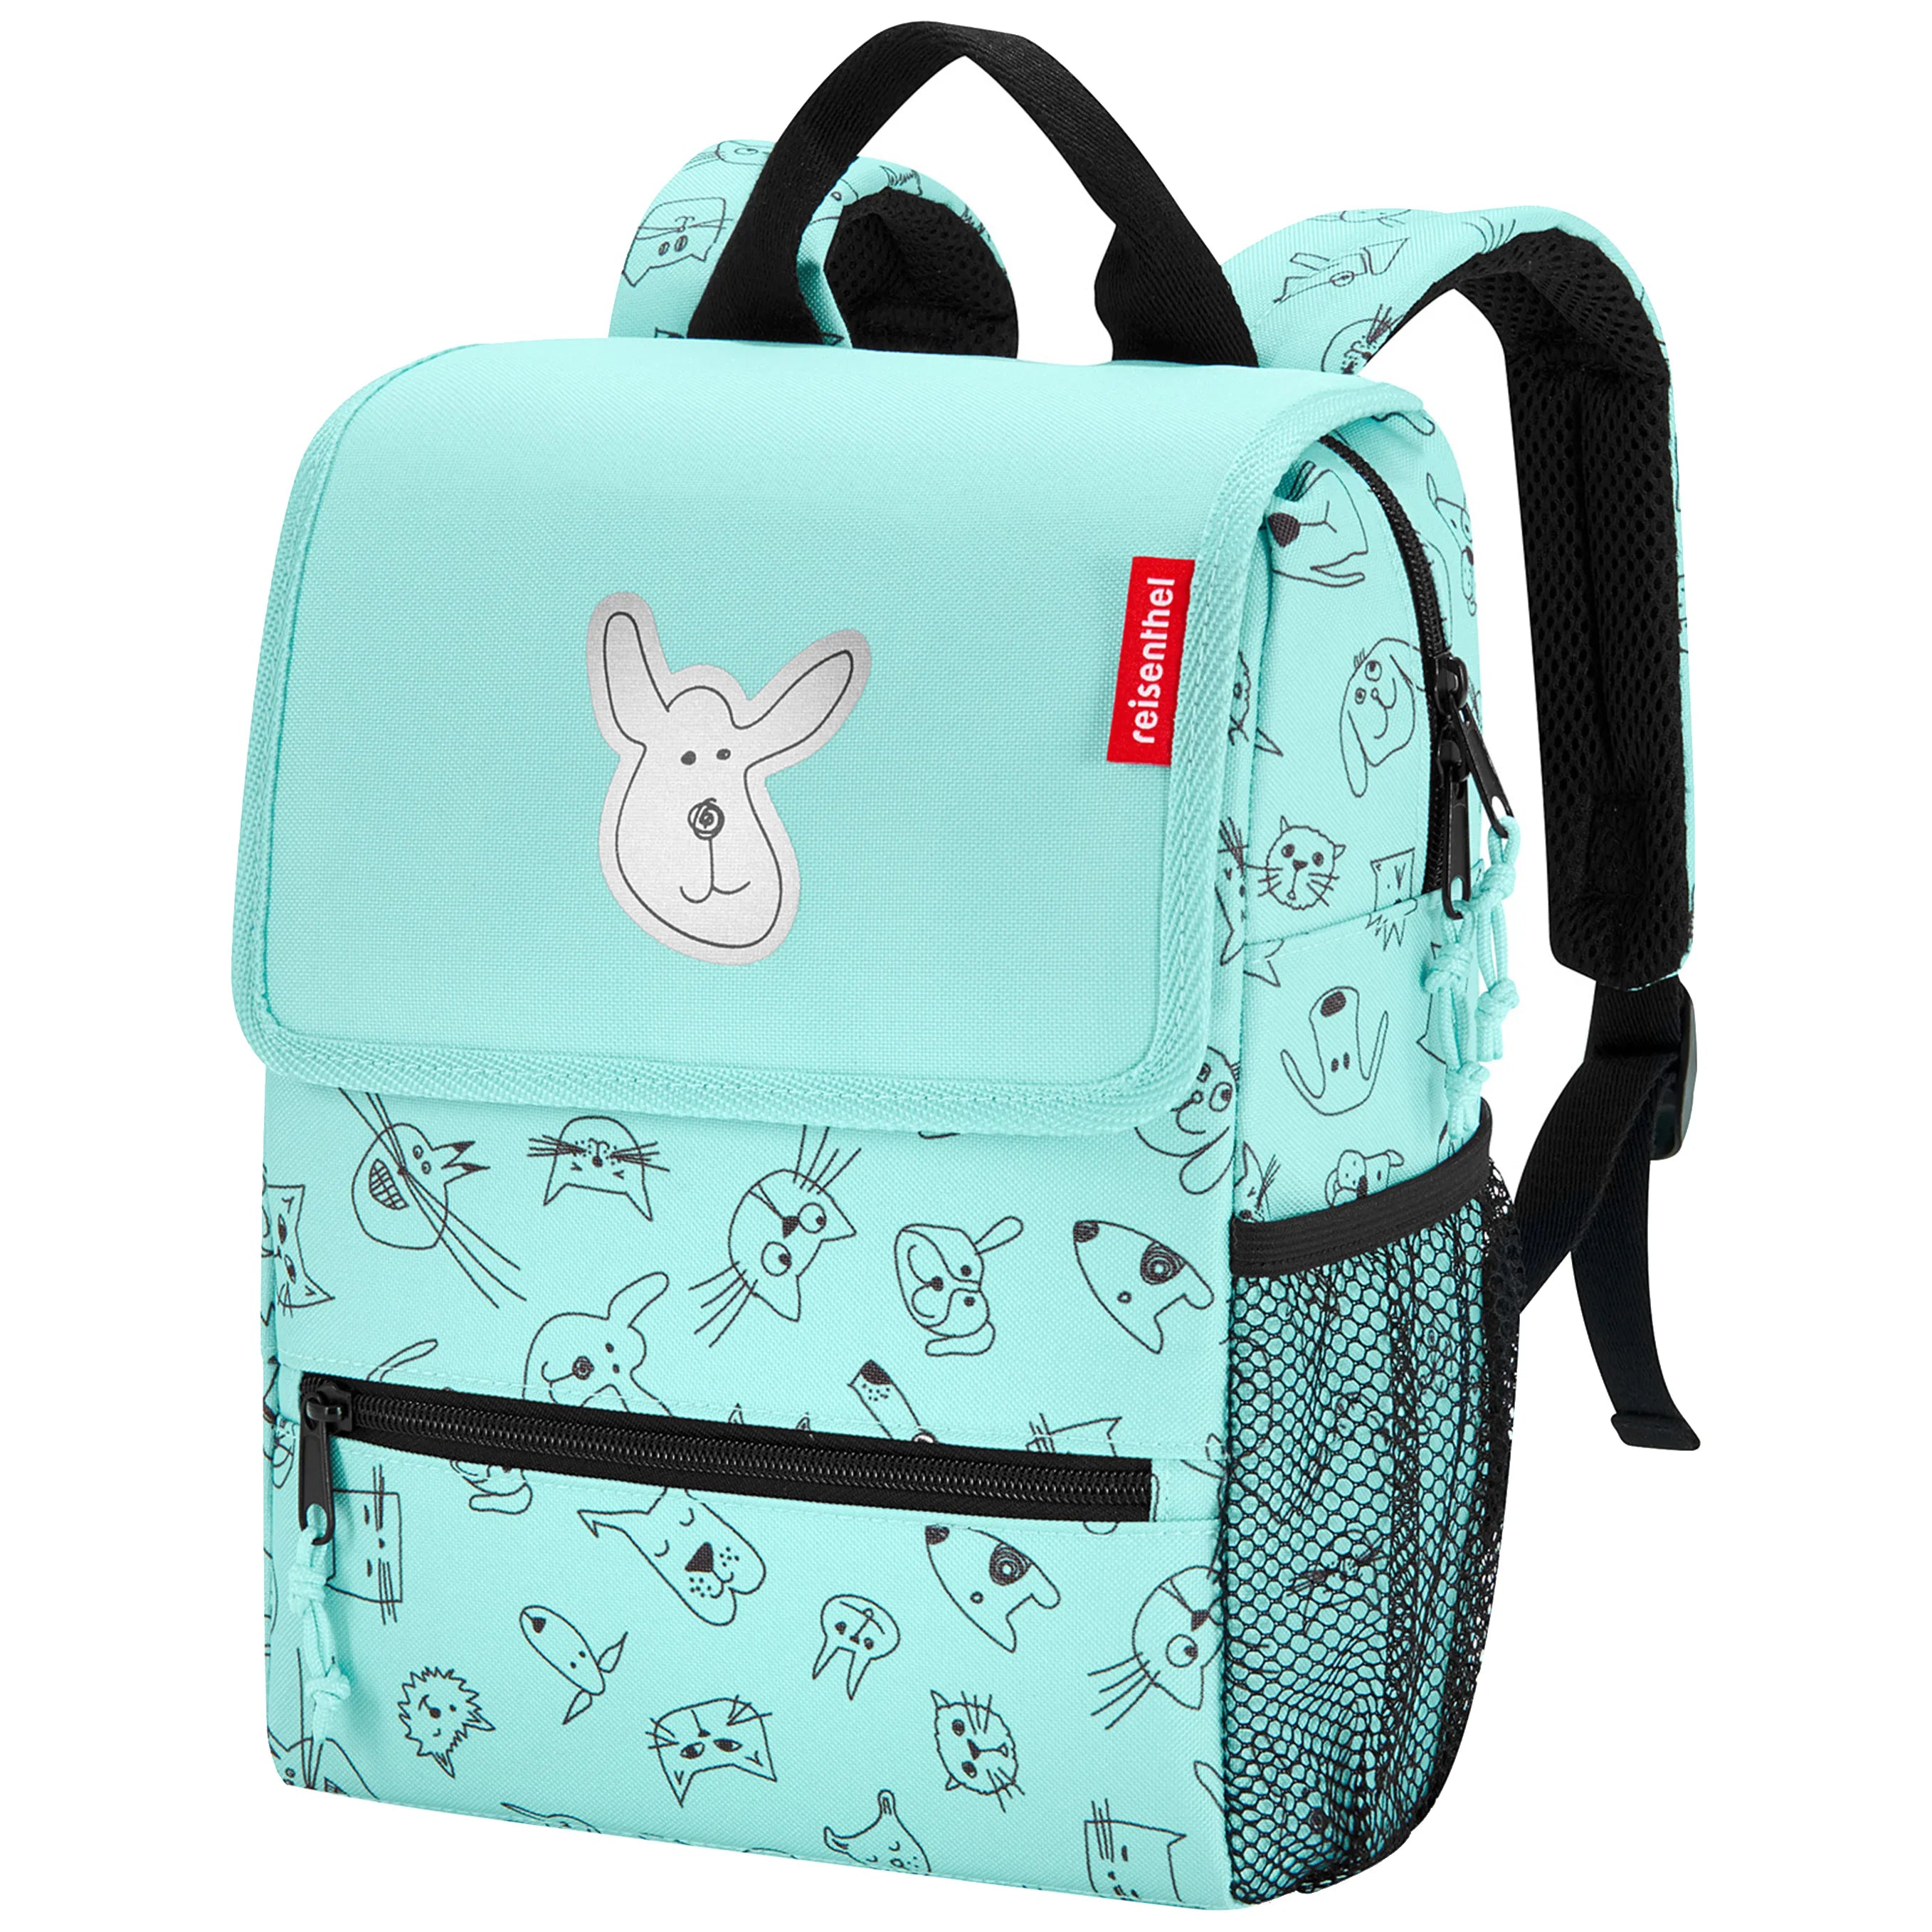 Reisenthel Kids Backpack Rucksack 28 cm - cats and dogs mint